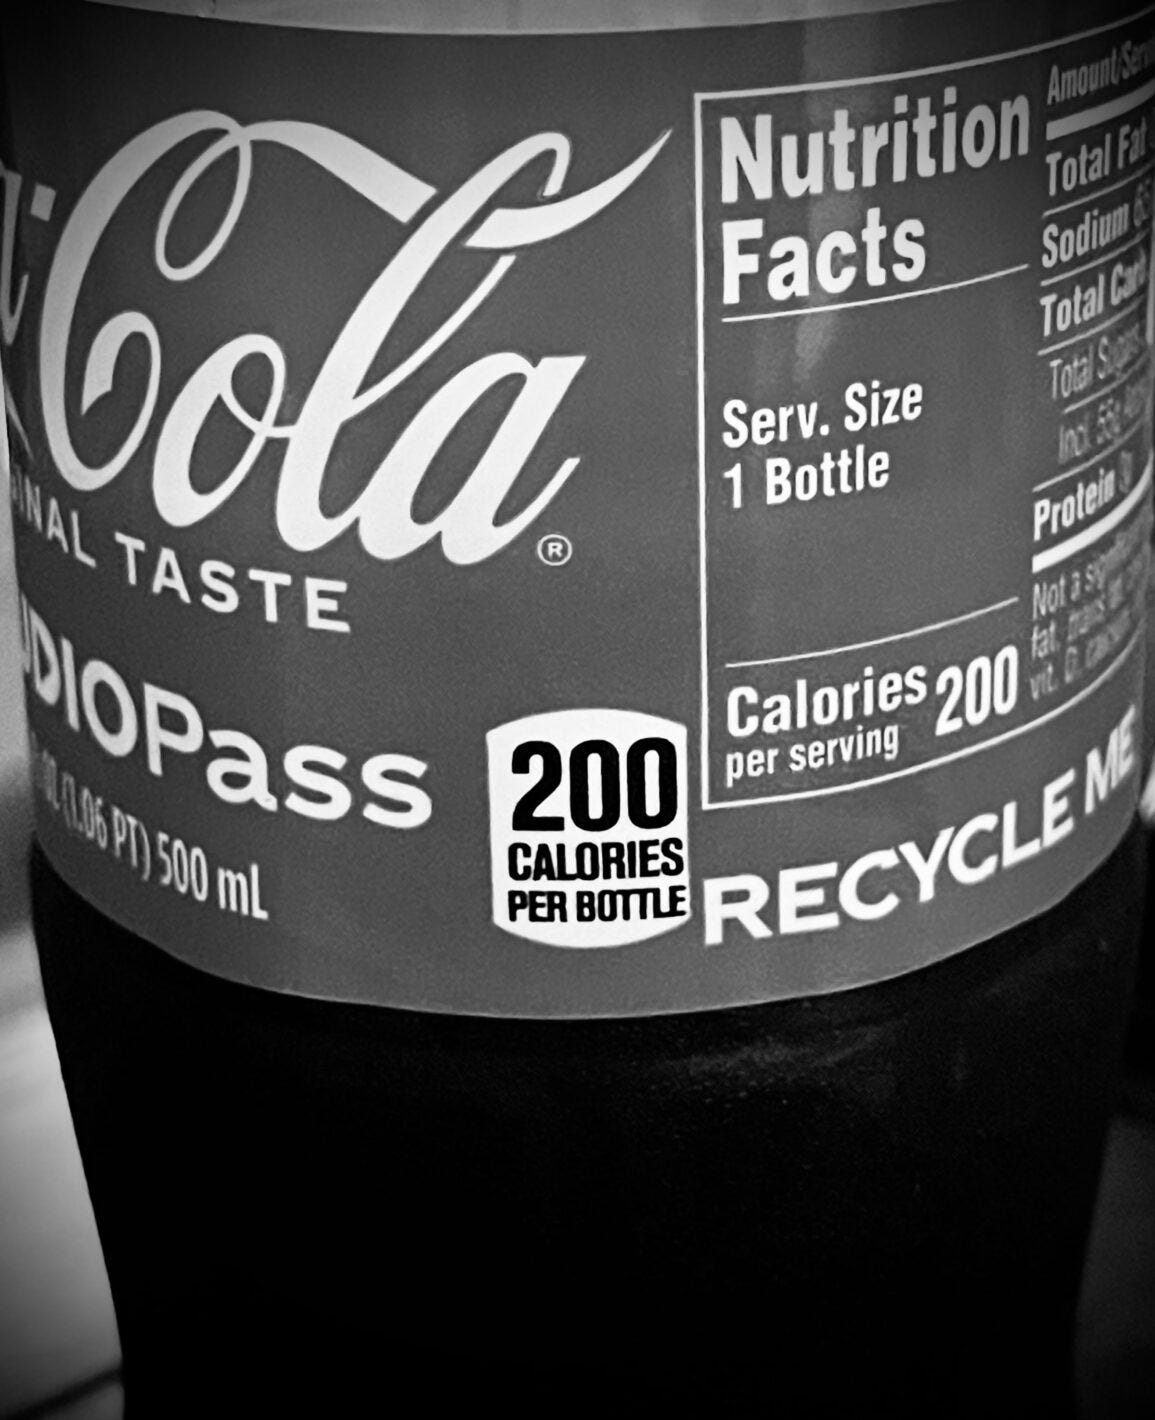 coke 200 death defying calories a 16.9 oz. bottle. I remember when they went from 12 to 16. Everyone thought that was crazy! And it was. Everyone's weight went up by that % and died earlier by that %.